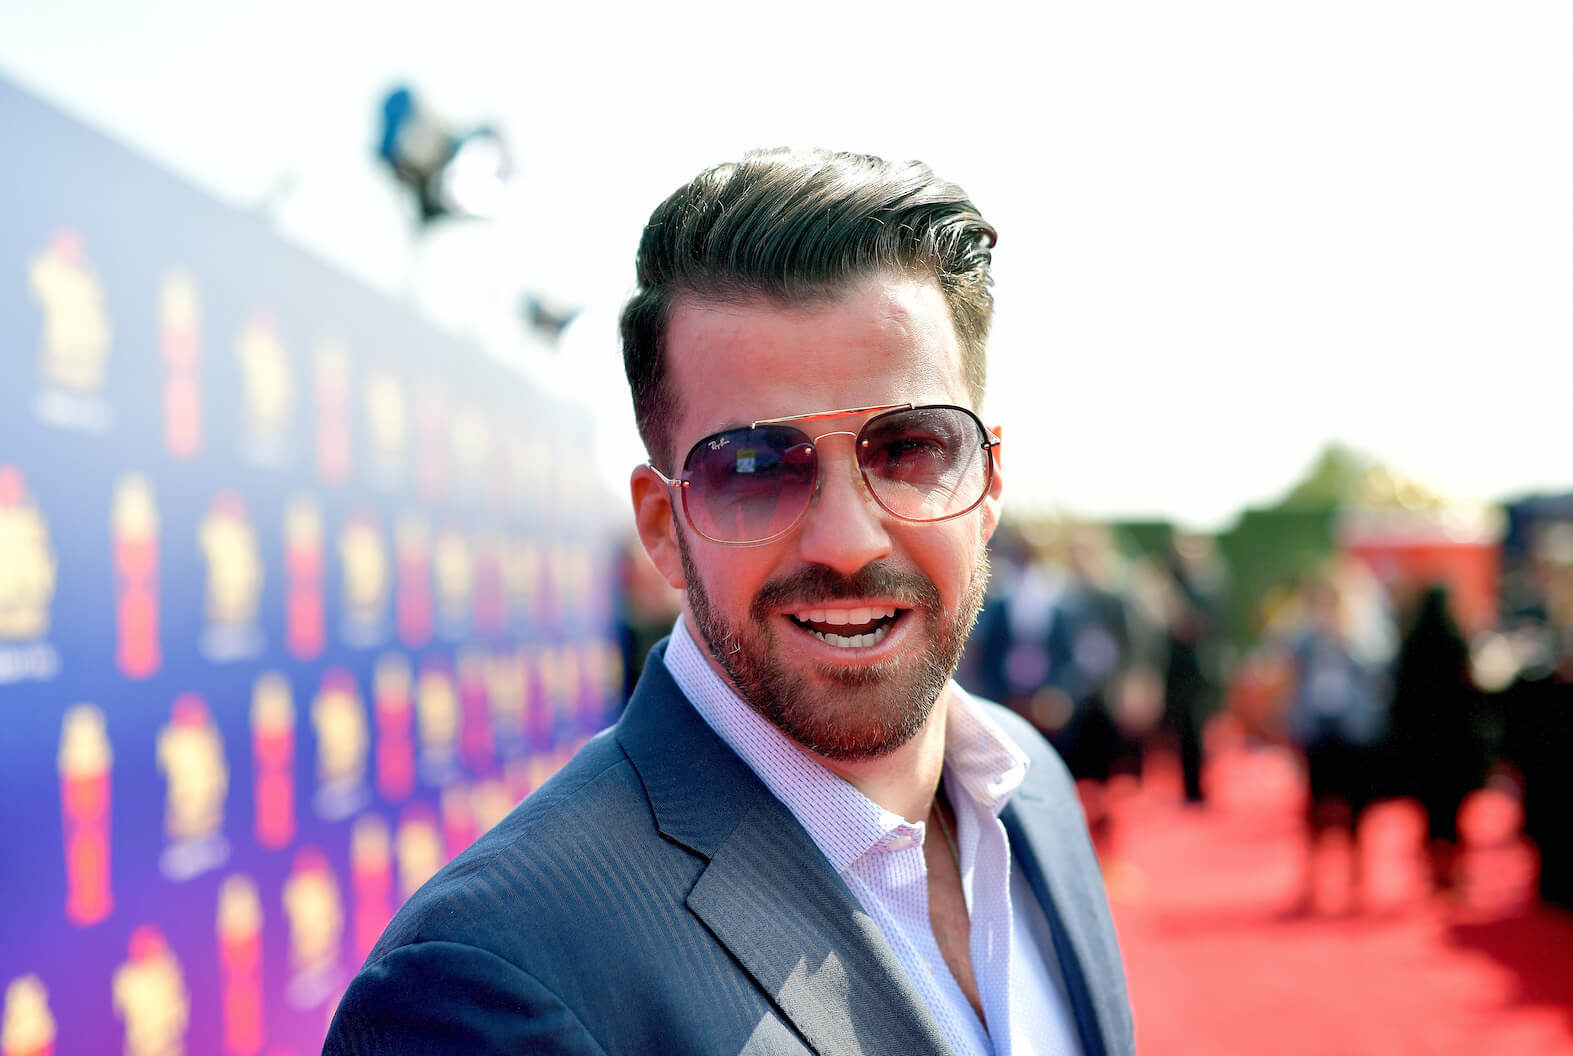 Johnny 'Bananas' Devenanzio from 'The Challenge' Season 38 smiling in sunglasses on the red carpet